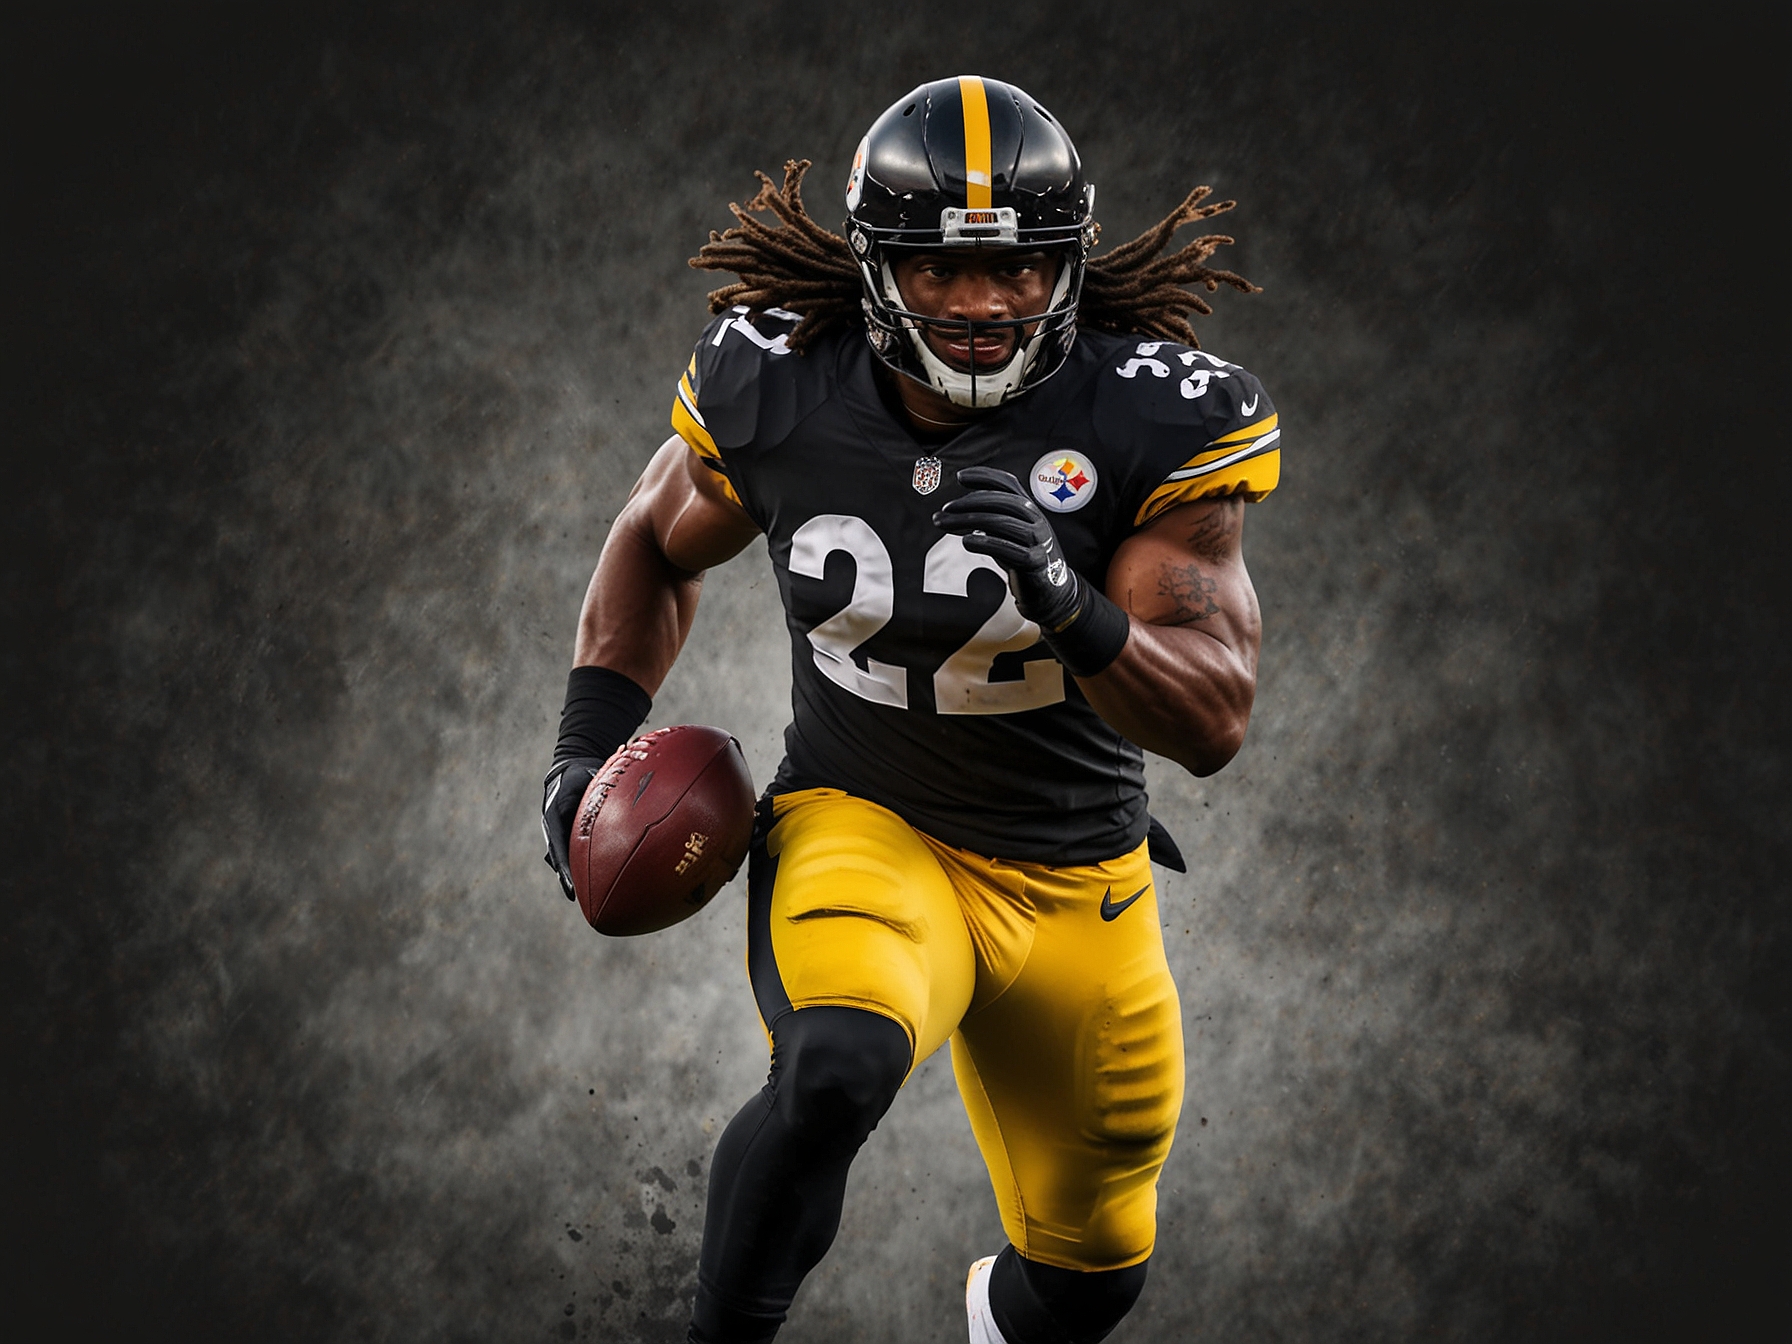 A depiction of Najee Harris in the backfield with limited support, showcasing the Steelers' need for depth and versatility in their running game to avoid predictability and enhance their offense.